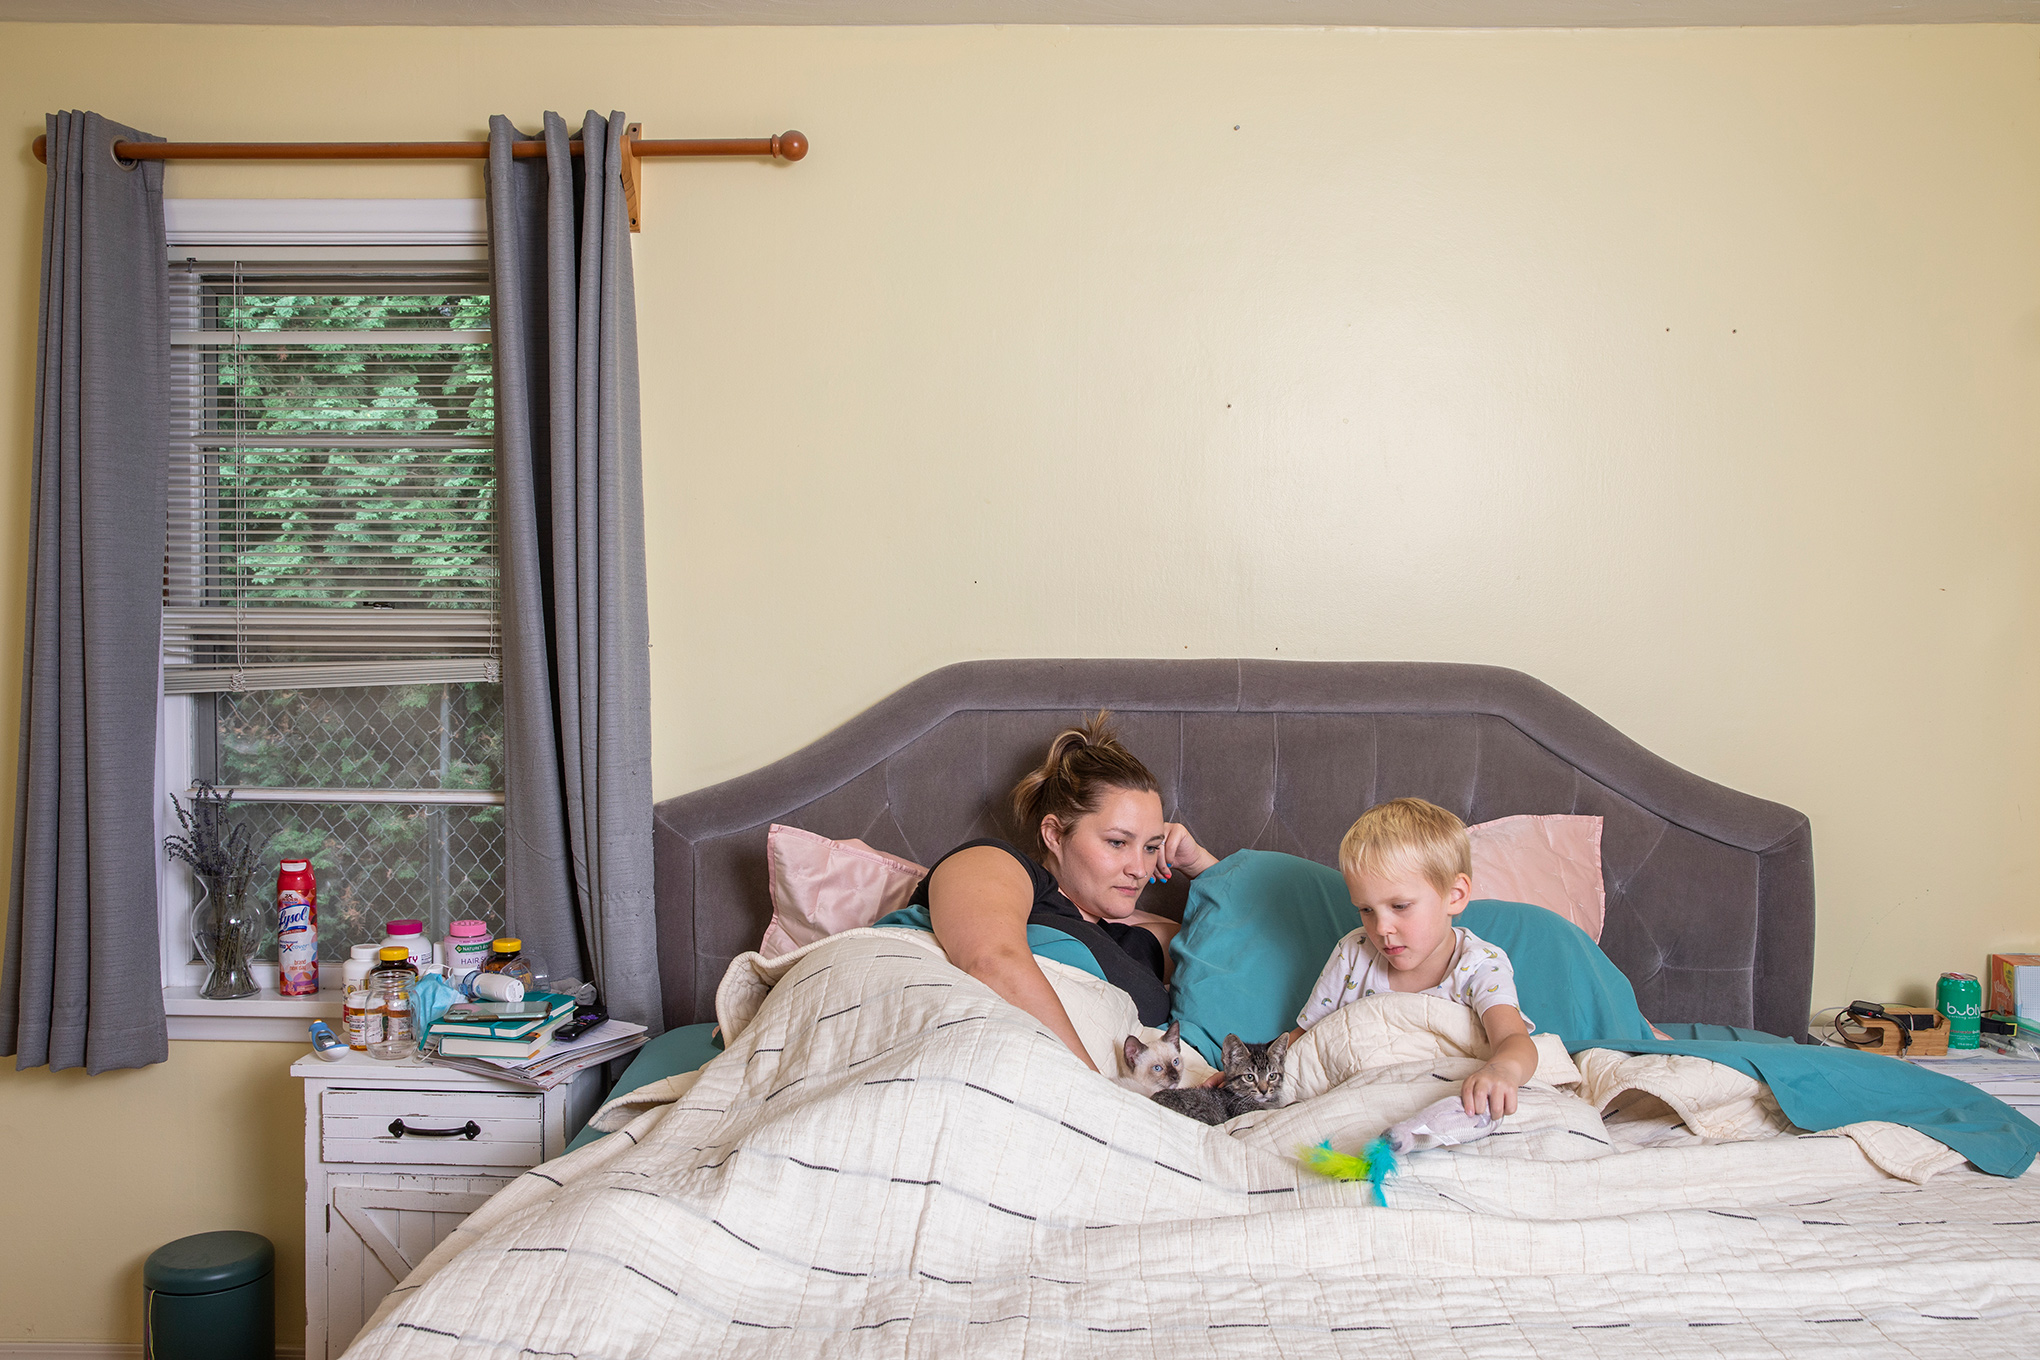 Kayla Brim and her son Titus, 4, at home in Caldwell, Idaho, on Aug. 11. With her energy sapped by long-term coronavirus symptoms, Brim spends much of her time in bed. (Angie Smith for TIME)